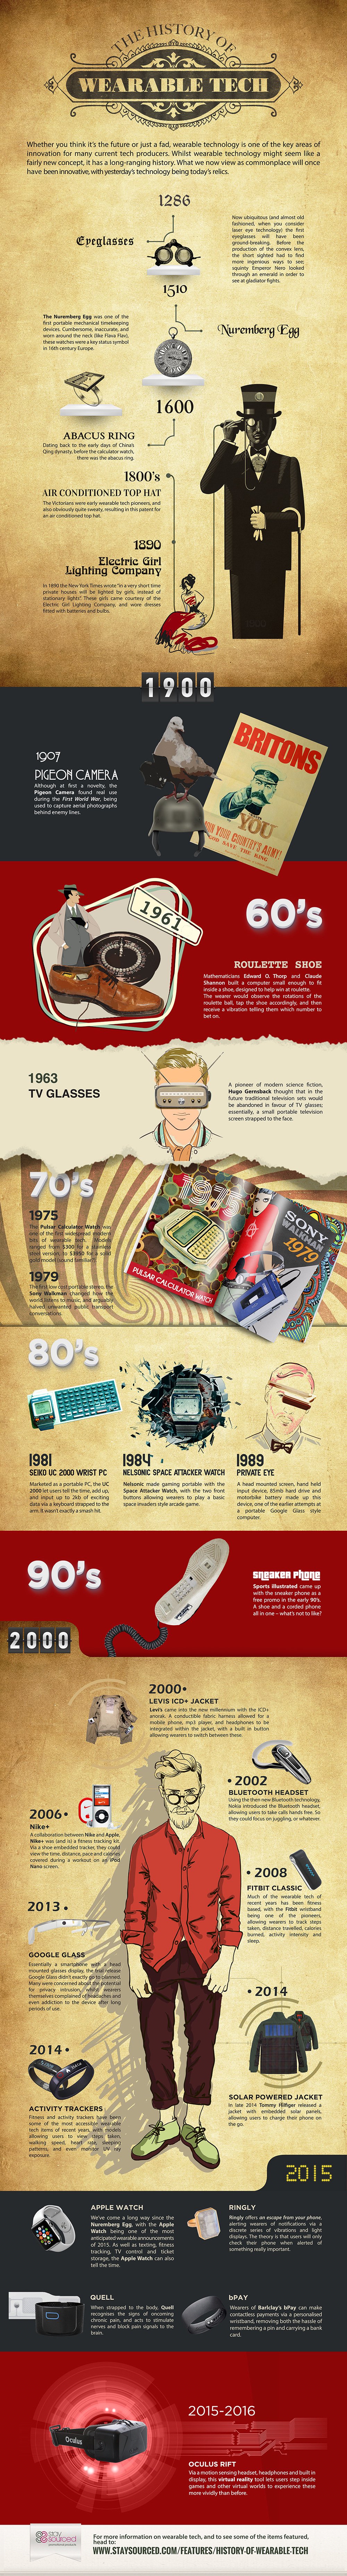 Wearable Tech History Infographic